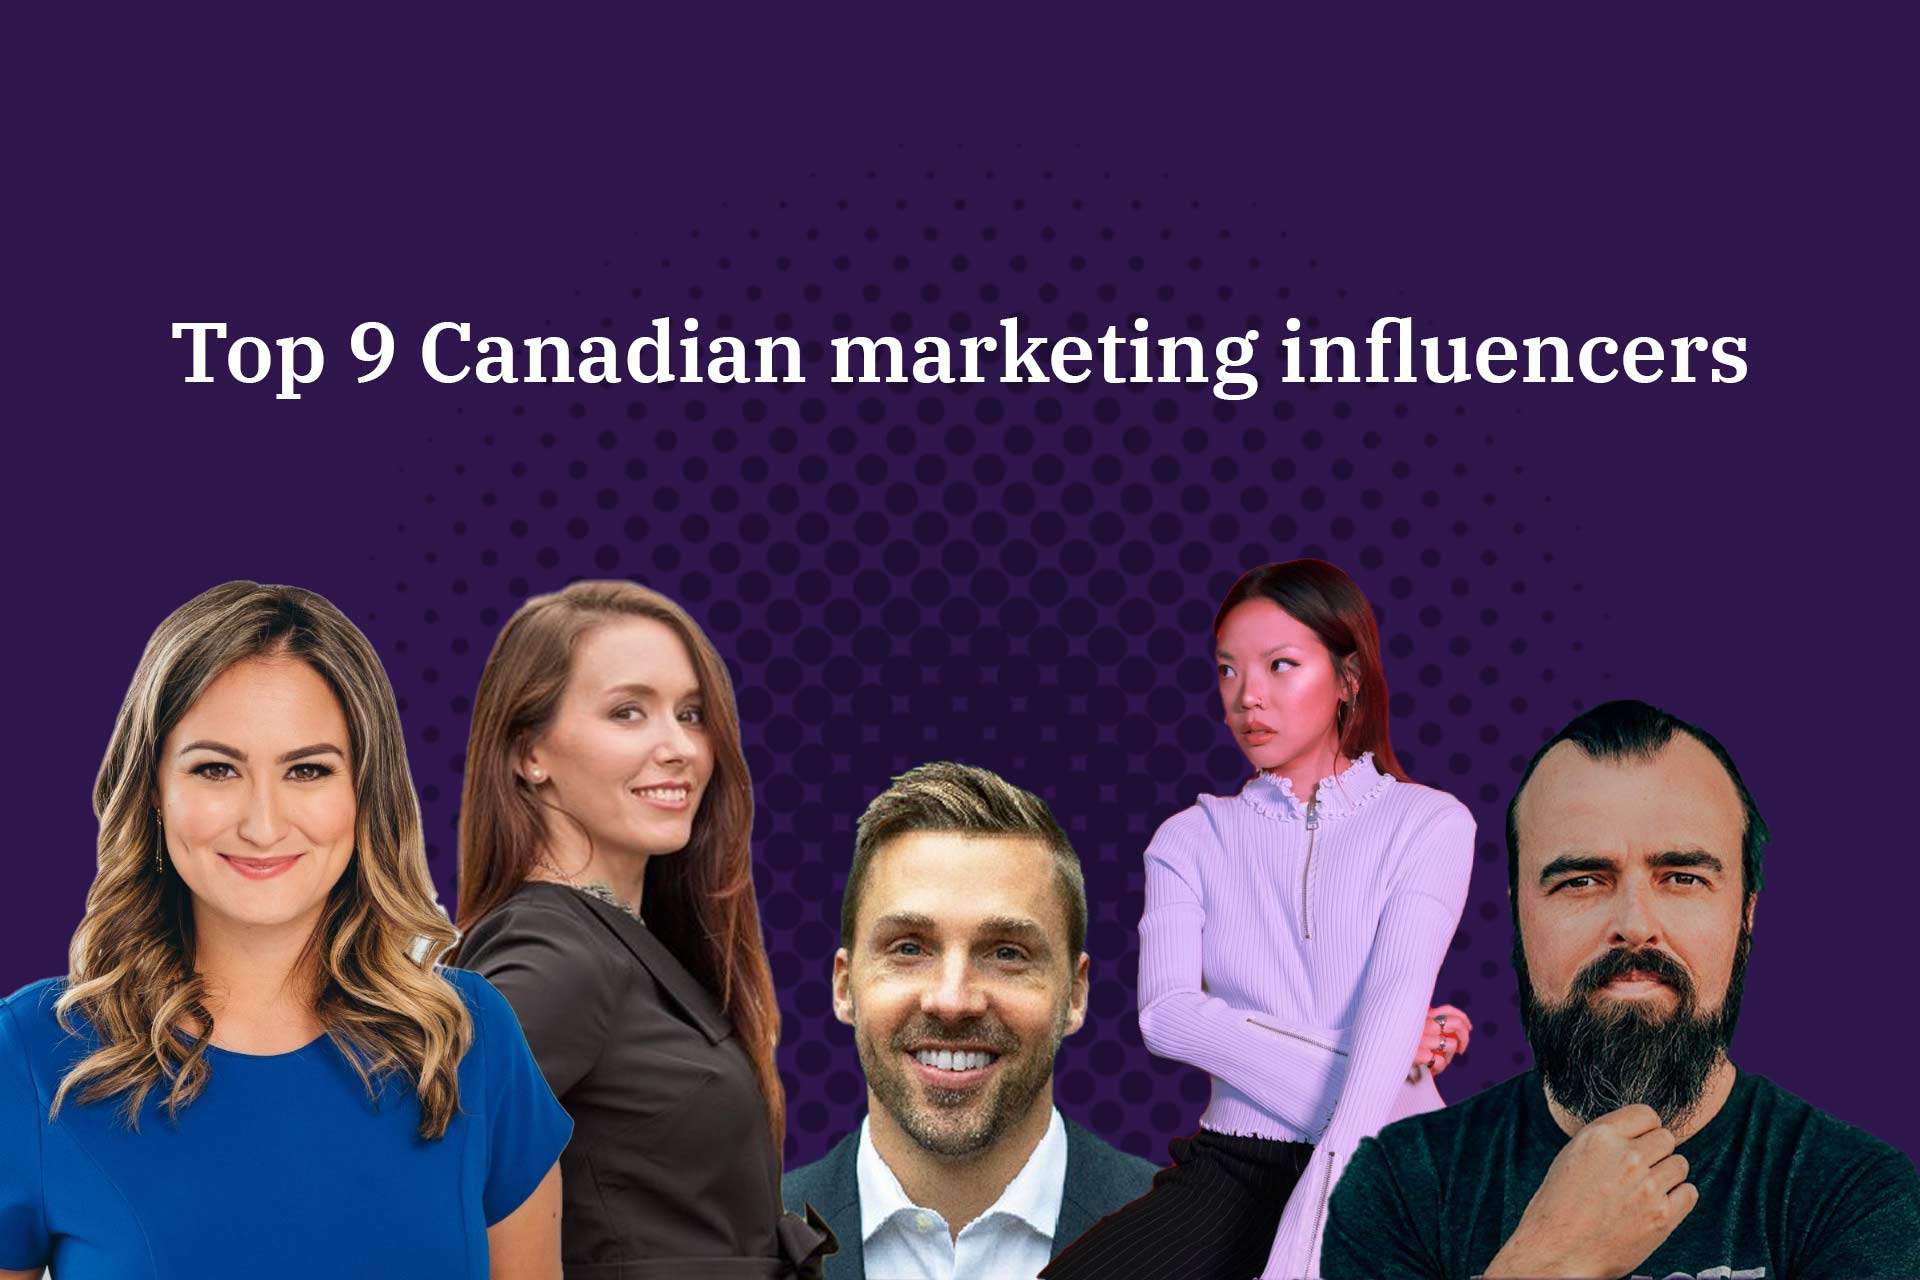 Top 9 Canadian marketing influencers